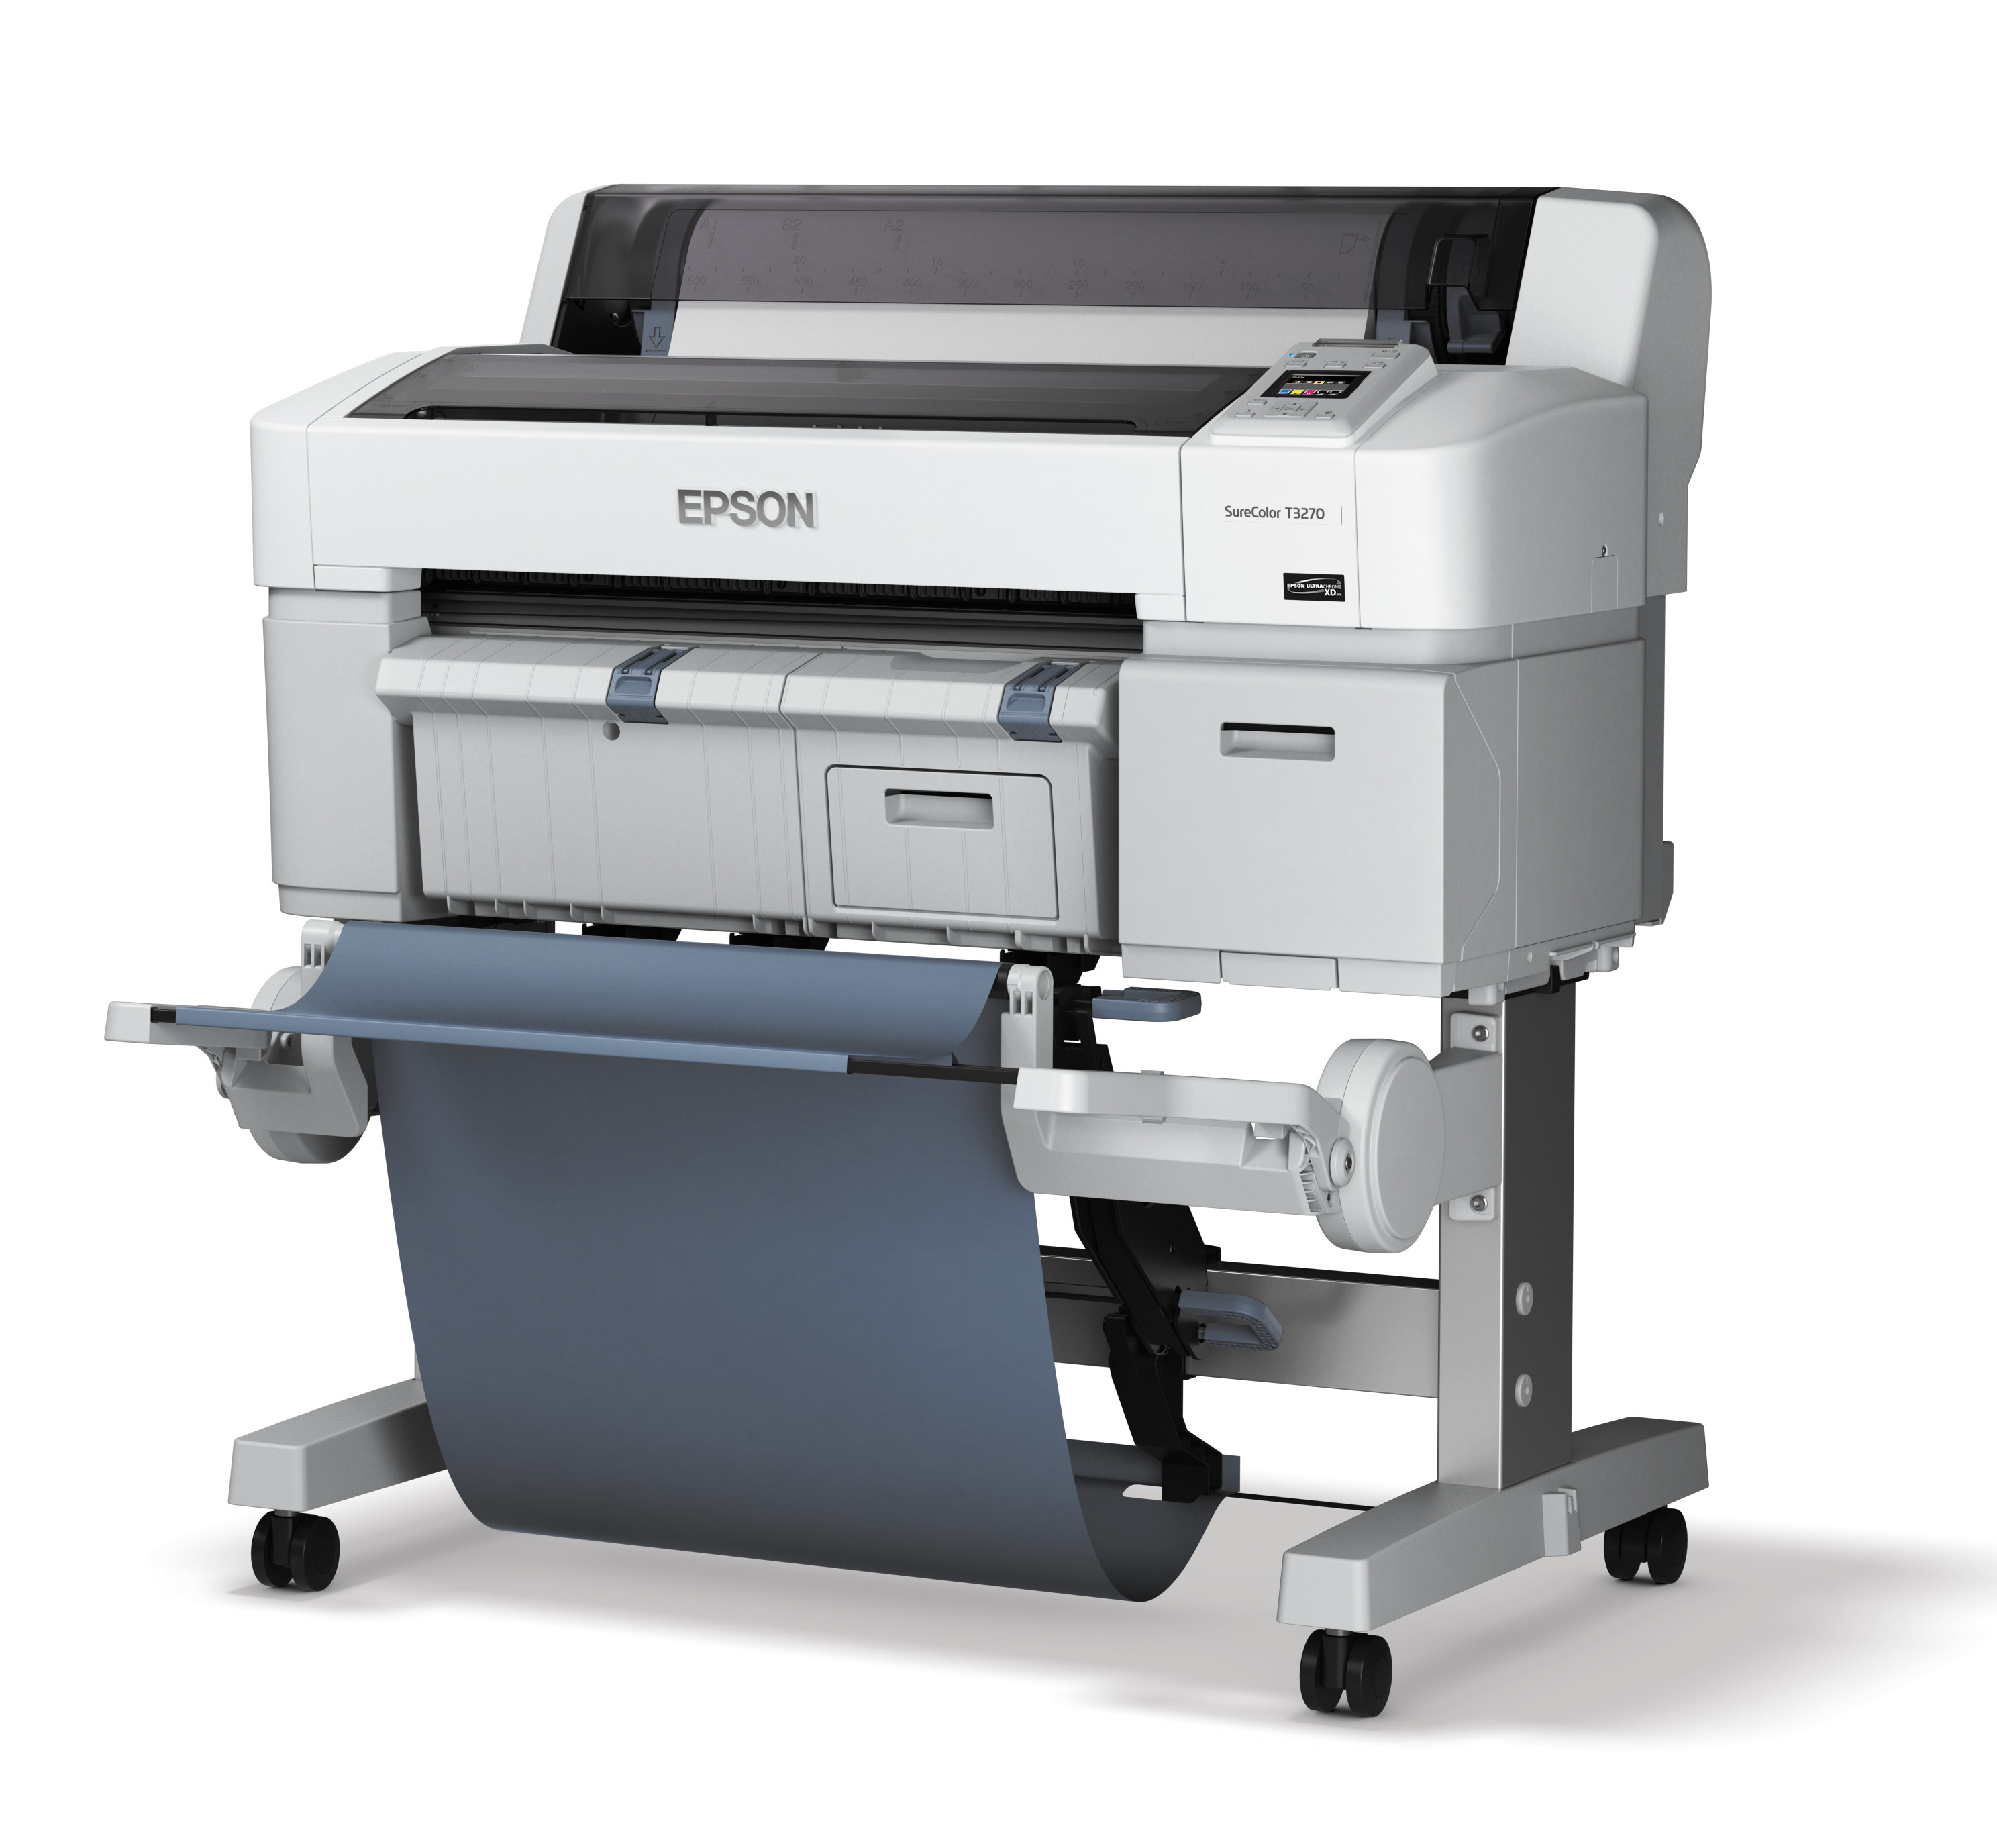 Epson Printer Software For Mac Printing Of Web Pages